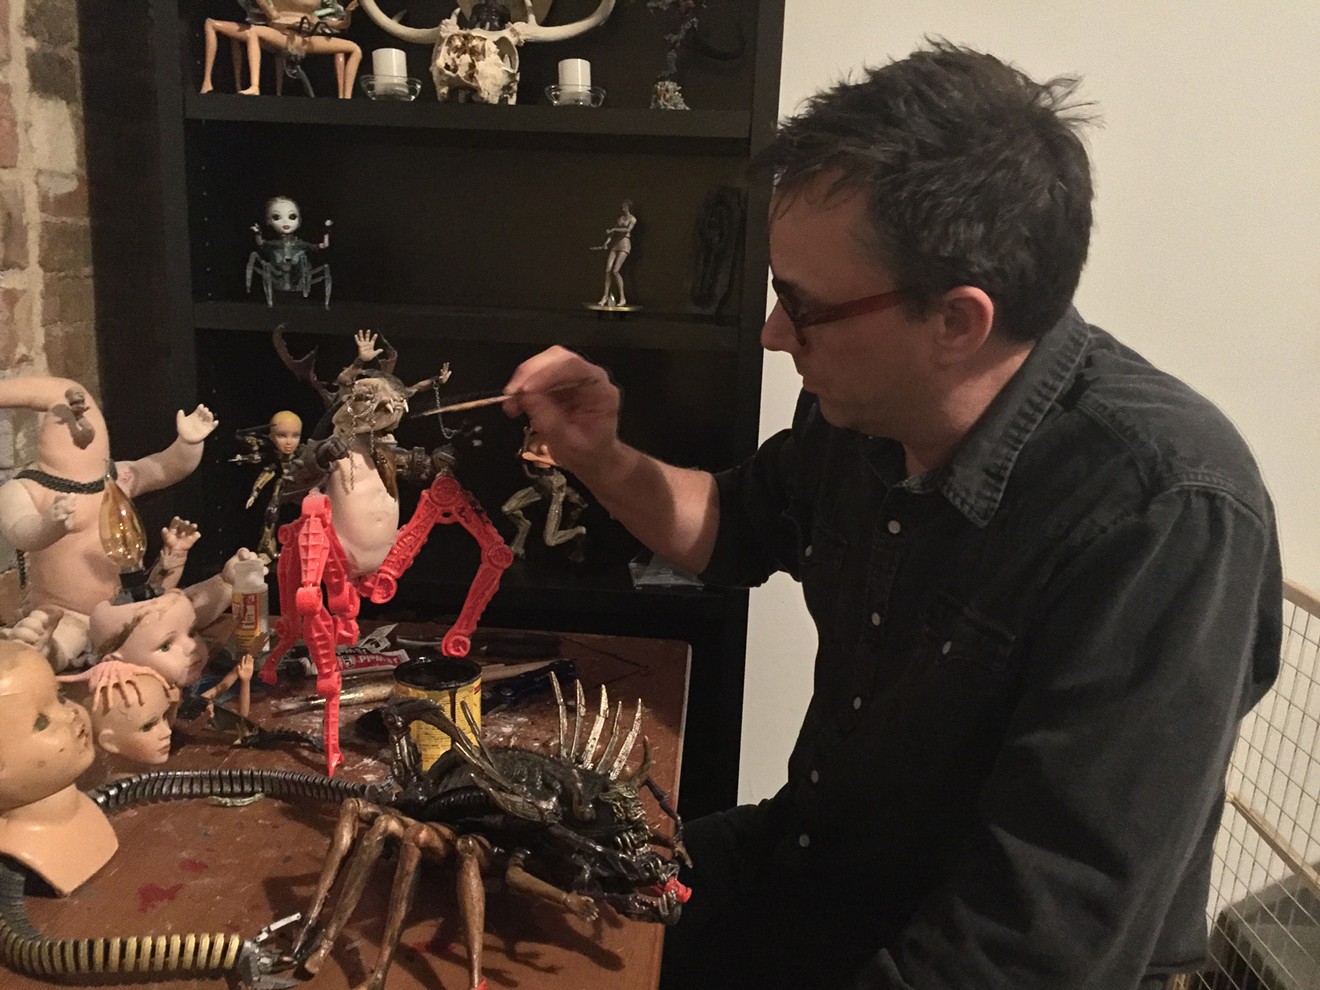 Artist and comedian David Jessup adds some stains to one of his macabre creations that he builds from discarded toy parts.